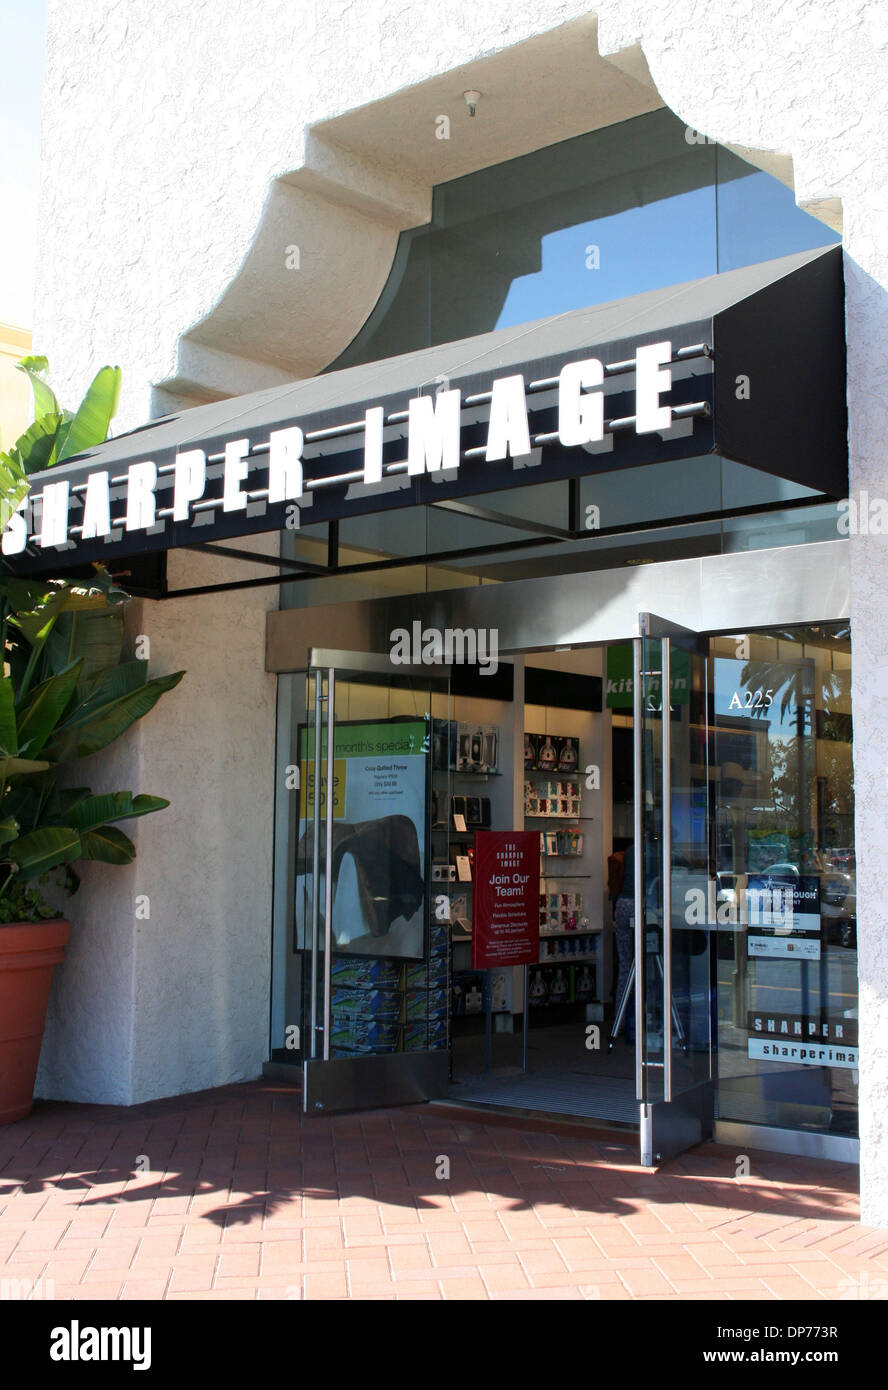 Nov 05, 2006; Newport Beach, CA, USA; The Sharper Image Corporation NASDAQ: SHRP, founded by Richard Thalheimer, is a speciality retailer that operates throughout the United States. The Sharper Image has been in business since 1977 and publicly traded since 1987. The company is headquartered in San Francisco, CA and employs 2500 people nationwide.  Pictured is the Sharper Image sto Stock Photo